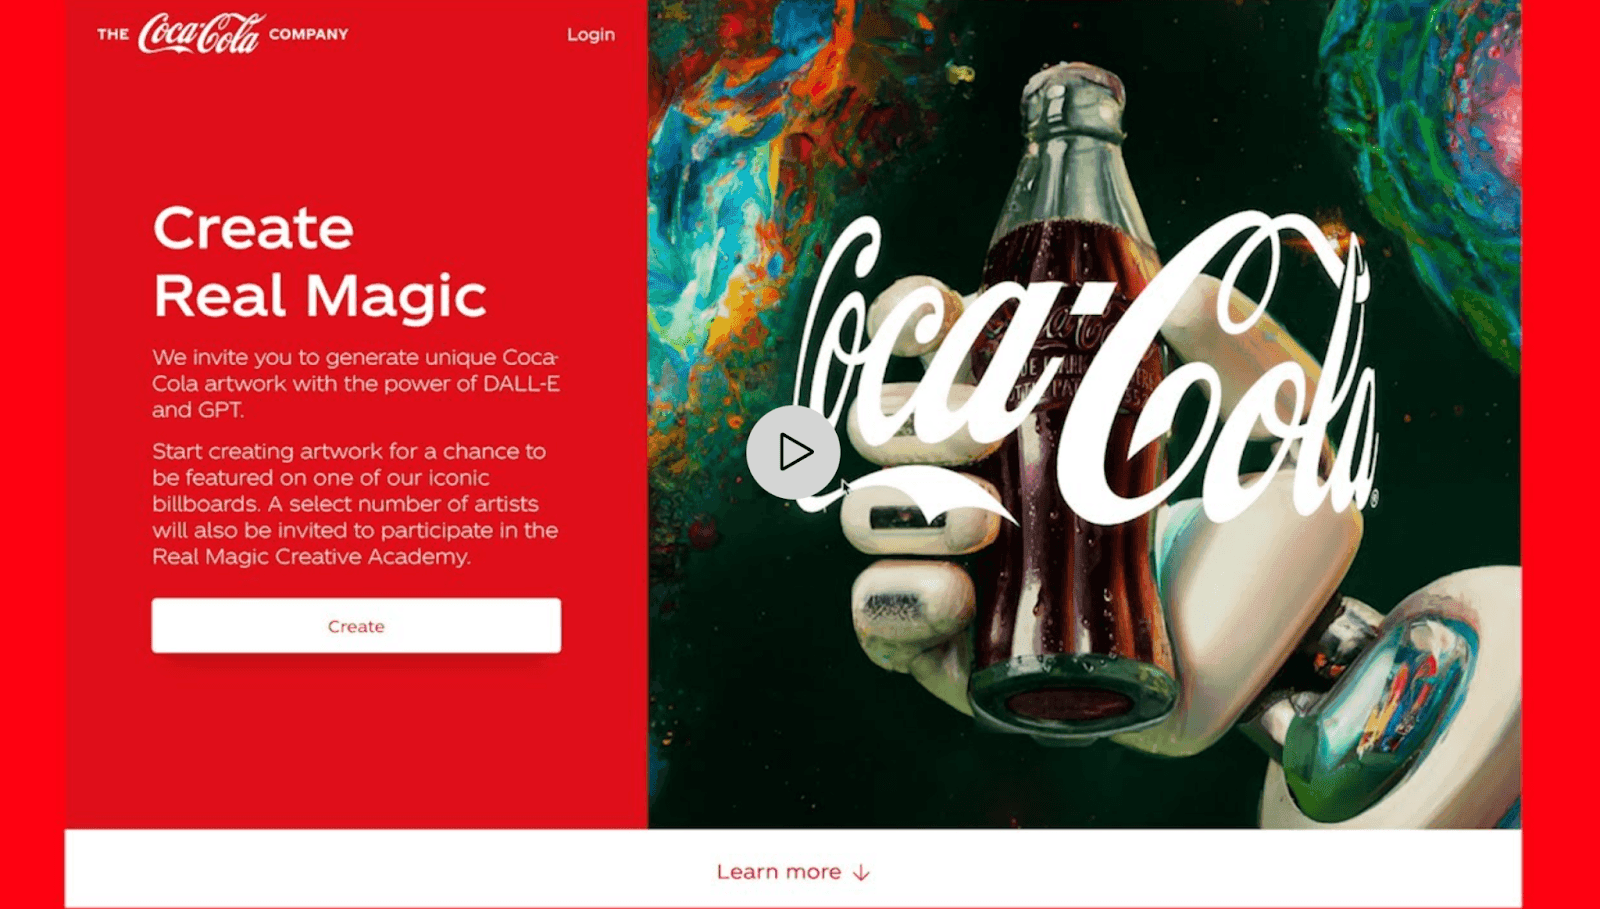 Create Real Magic - create Coca-Cola artwork with DALL-E and GPT for a chance to be featured on a billboard